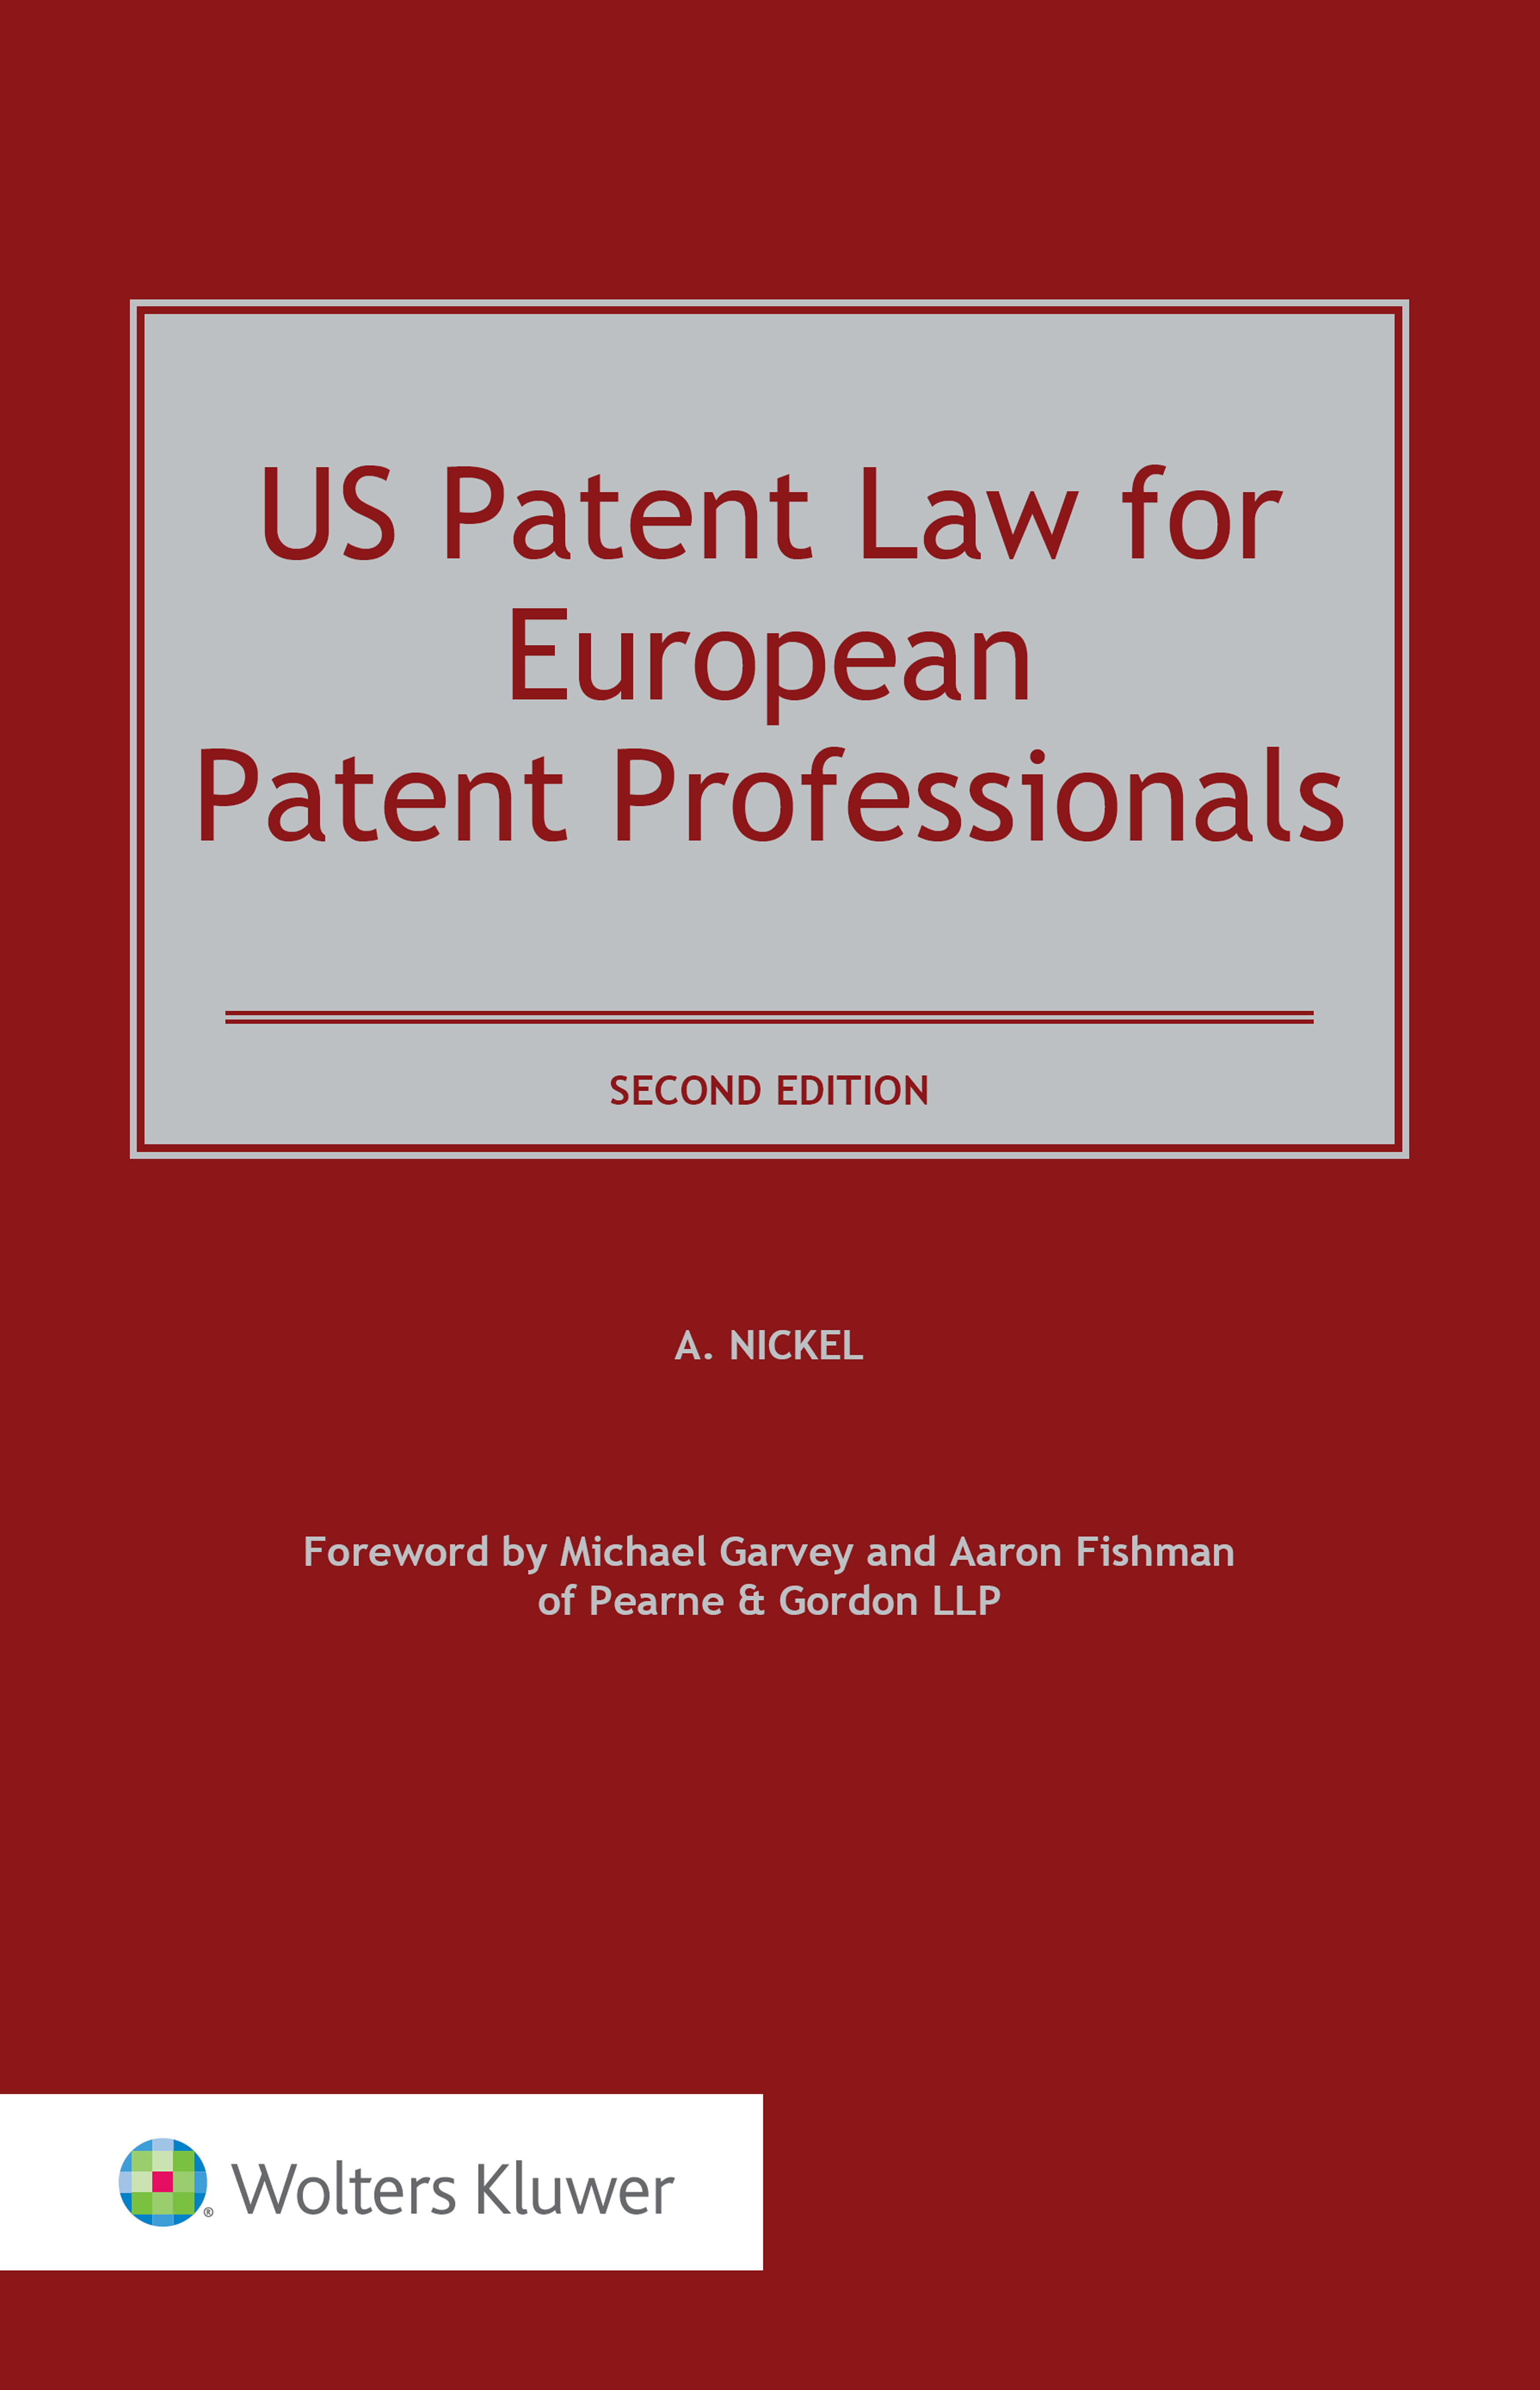 literature review on patent law